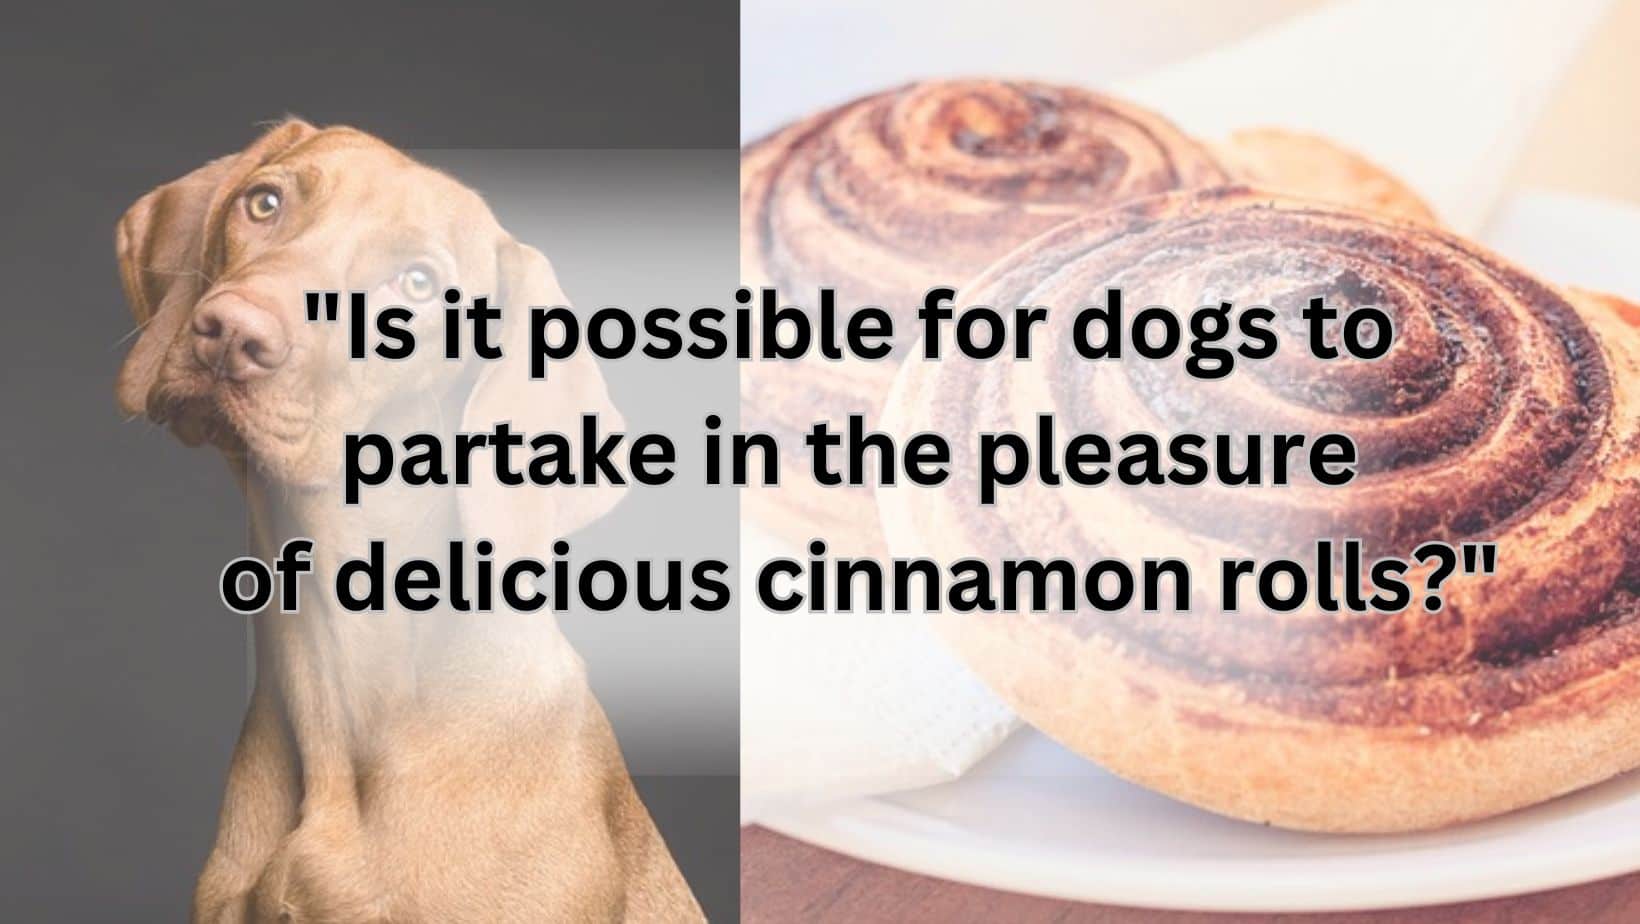 "Are dogs able to enjoy tasty cinnamon rolls?"